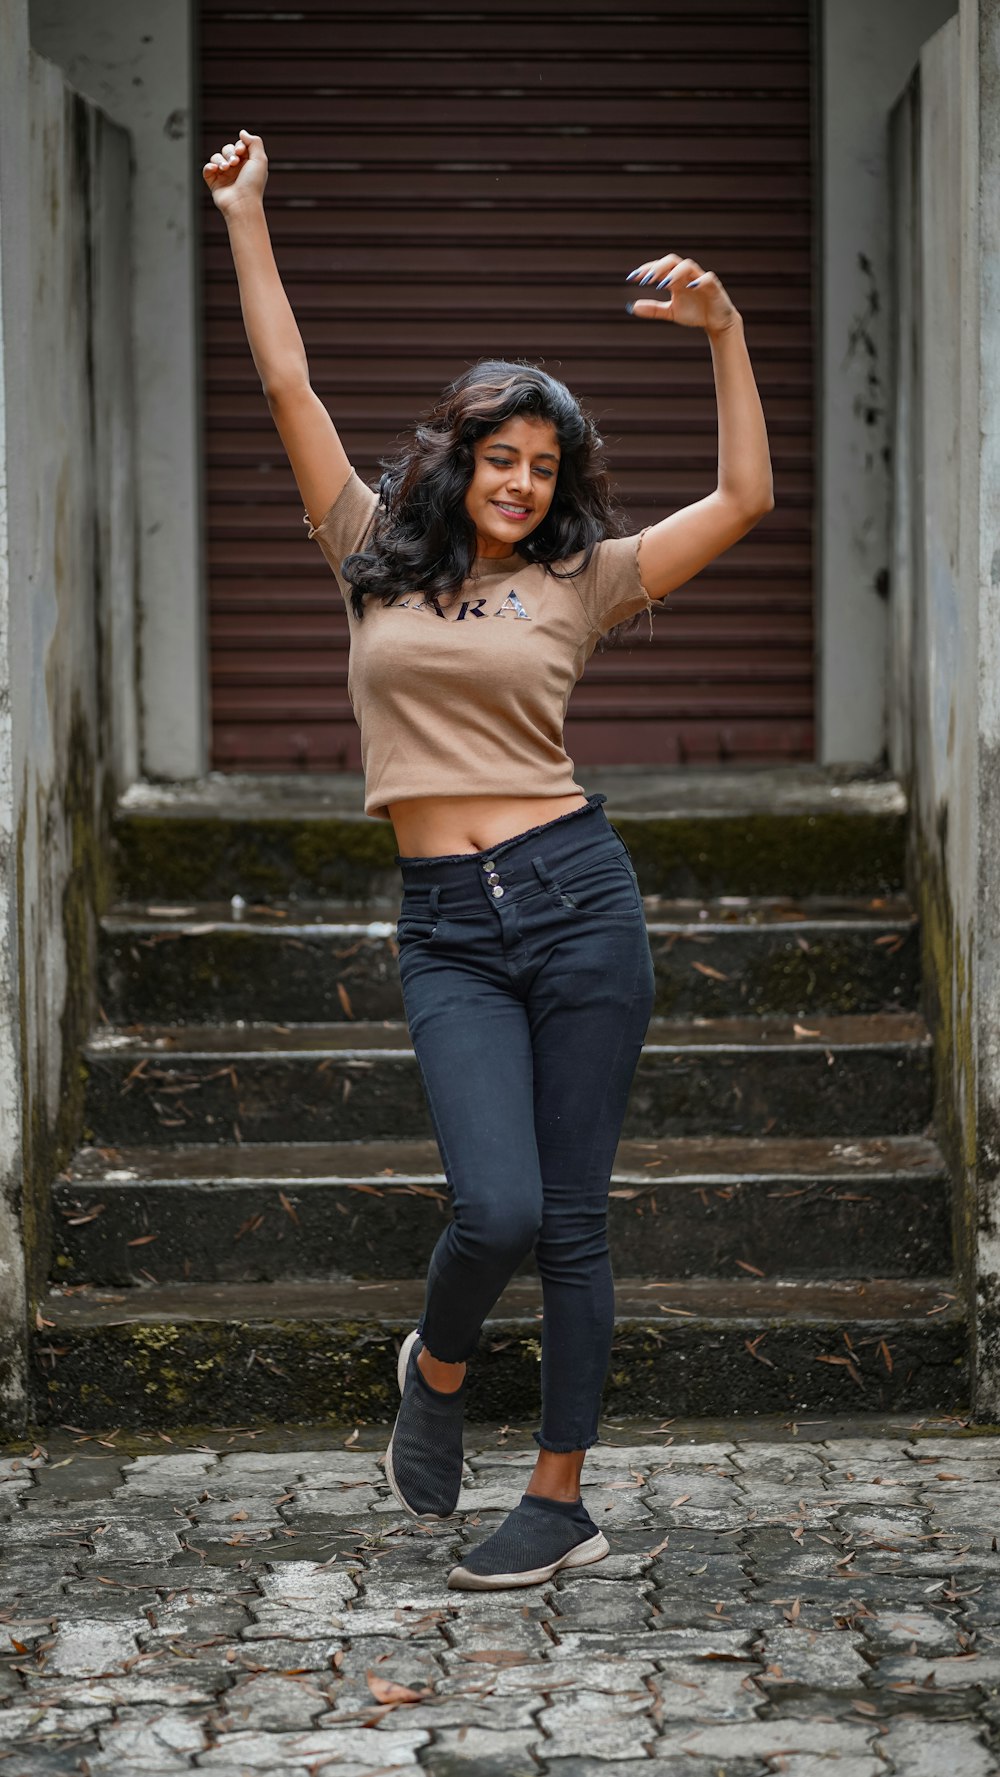 a woman in a tan shirt and jeans jumping in the air